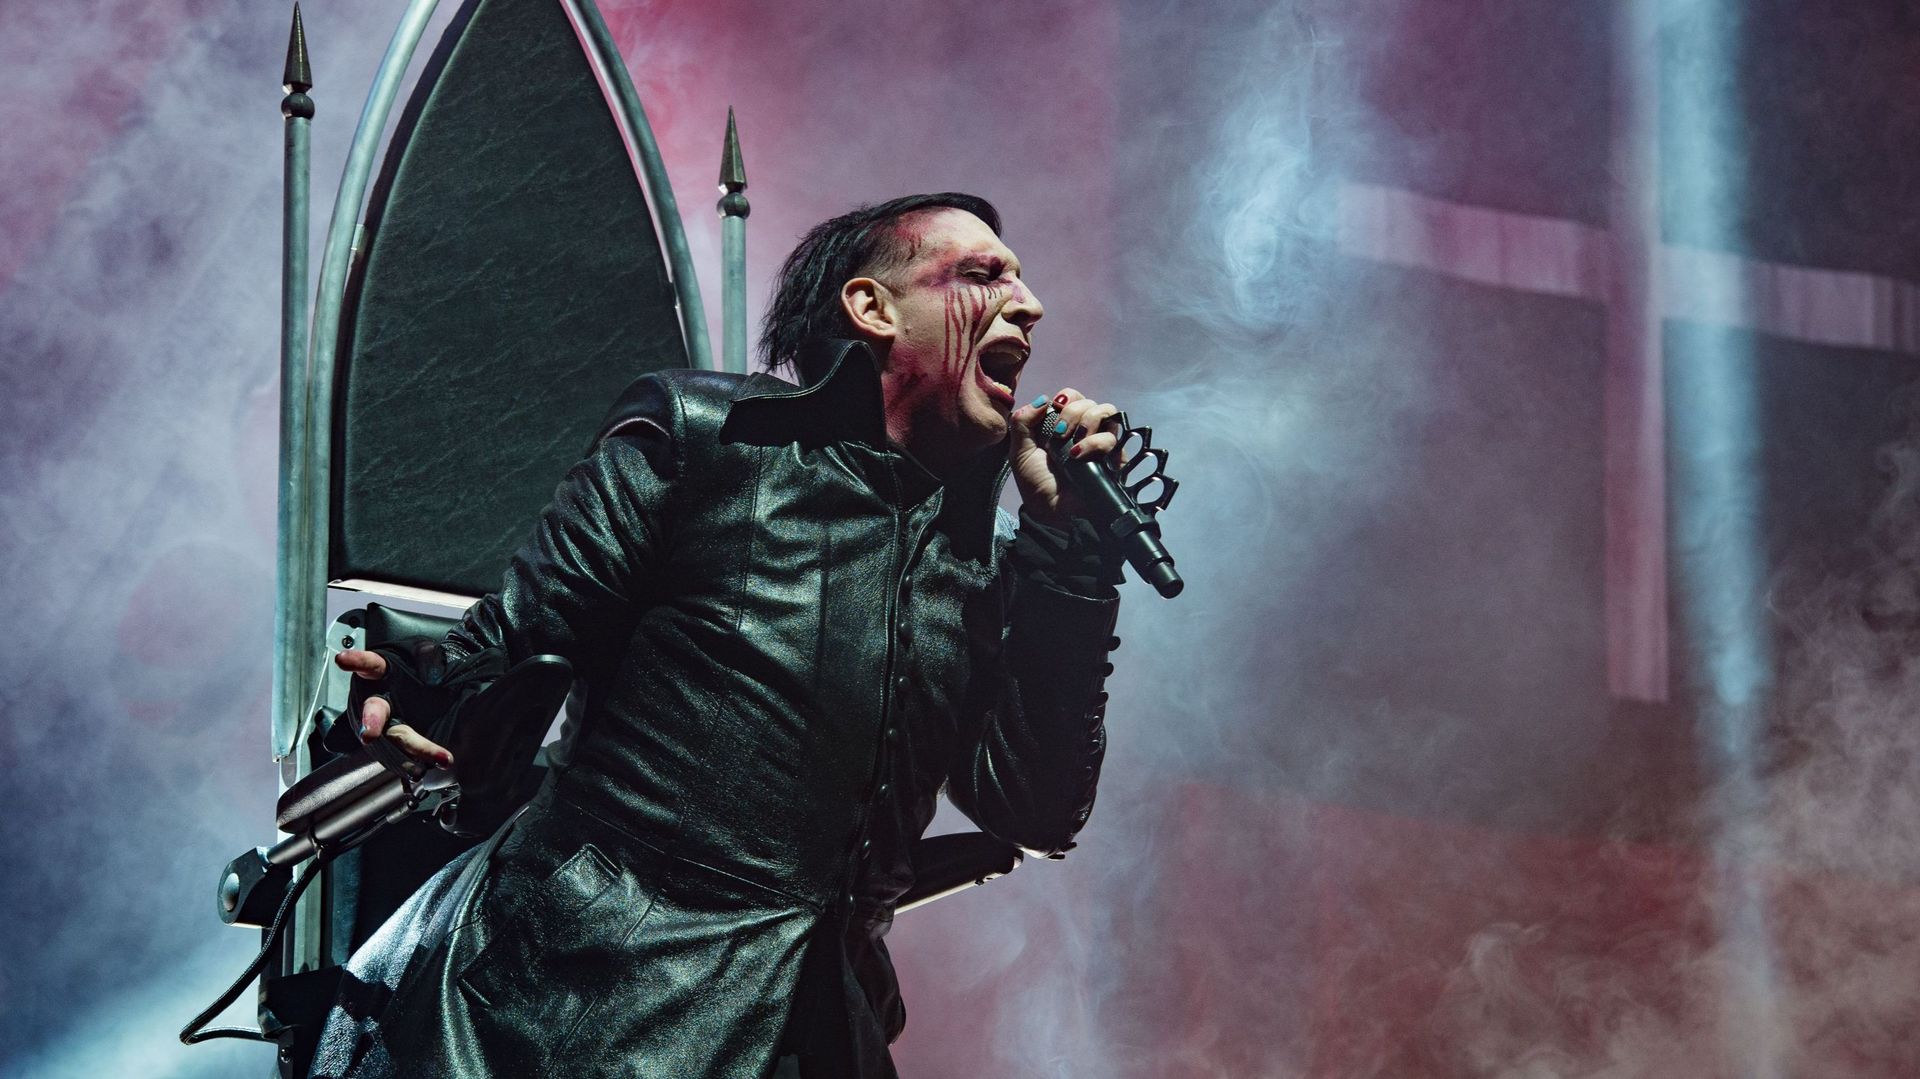 Marilyn Manson Performs At AccorHotels Arena In Paris